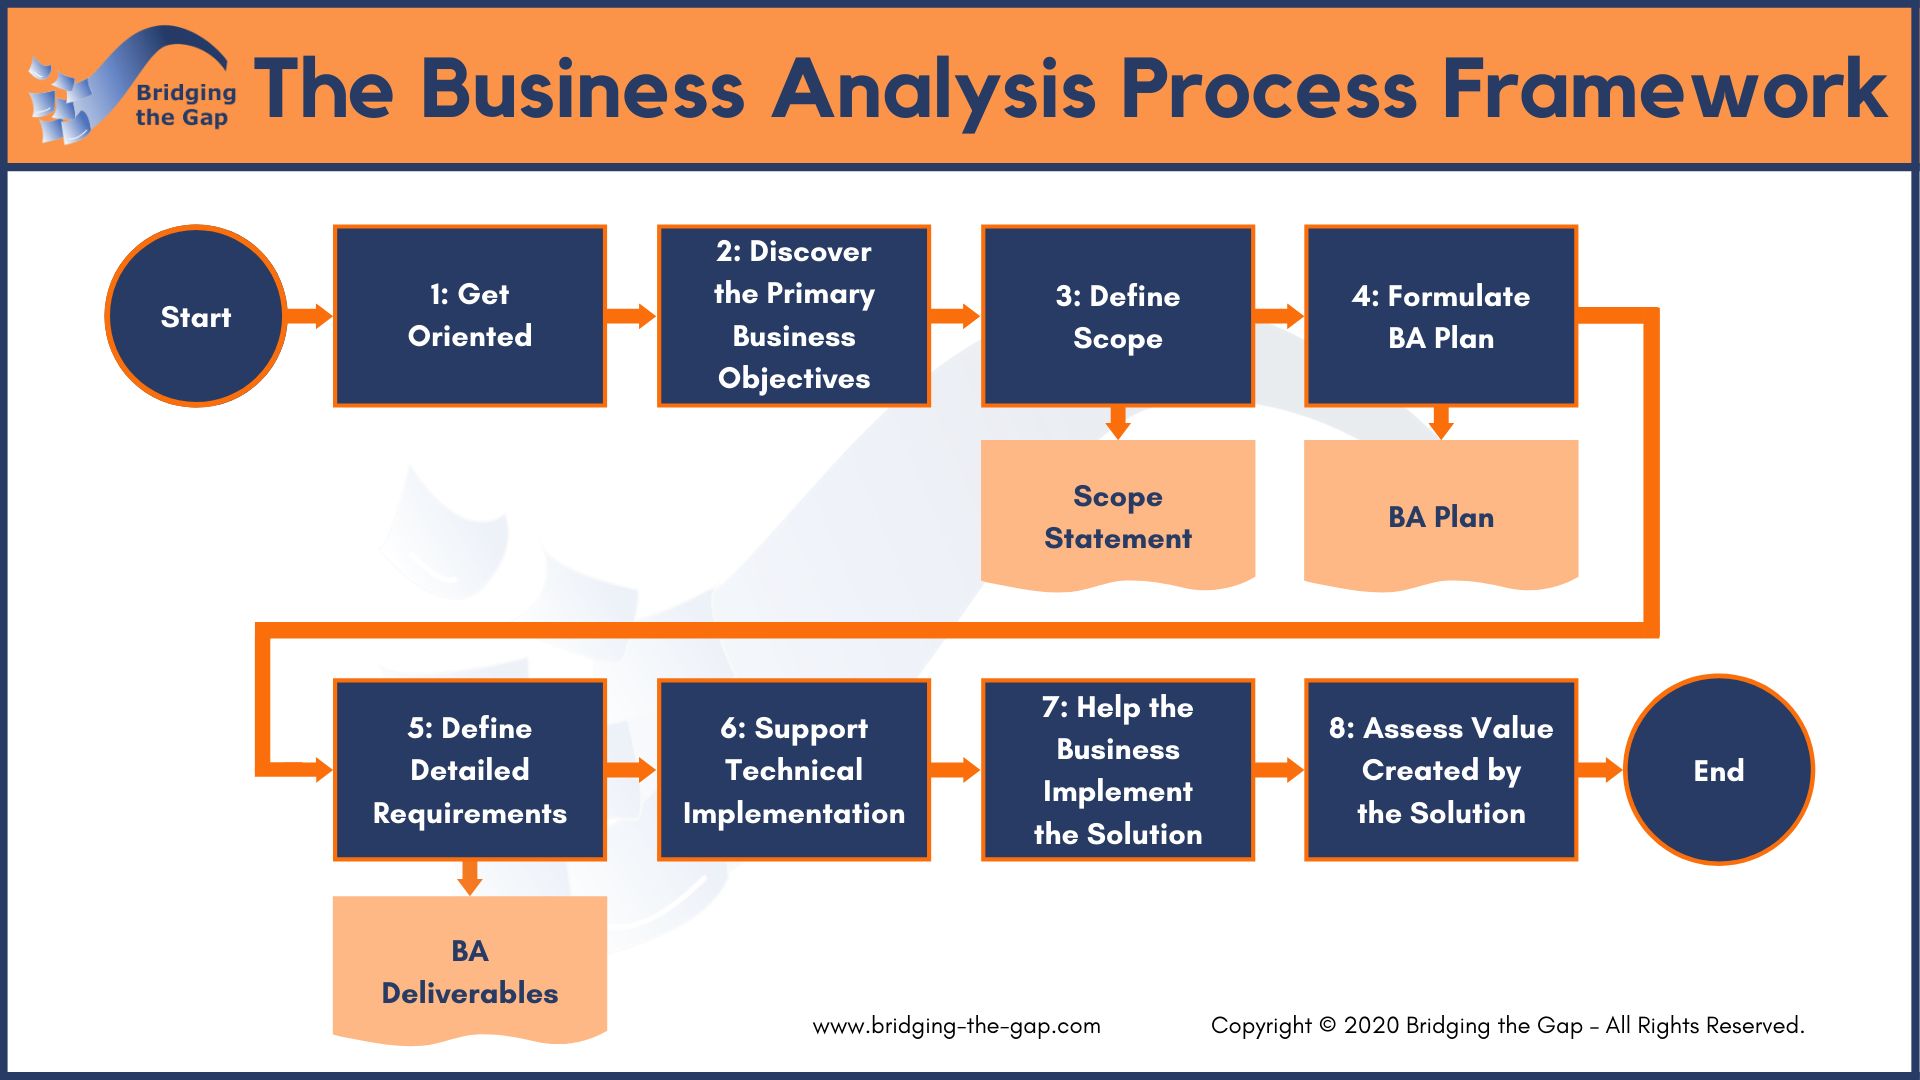 An introduction to business analysis and the business analyst process